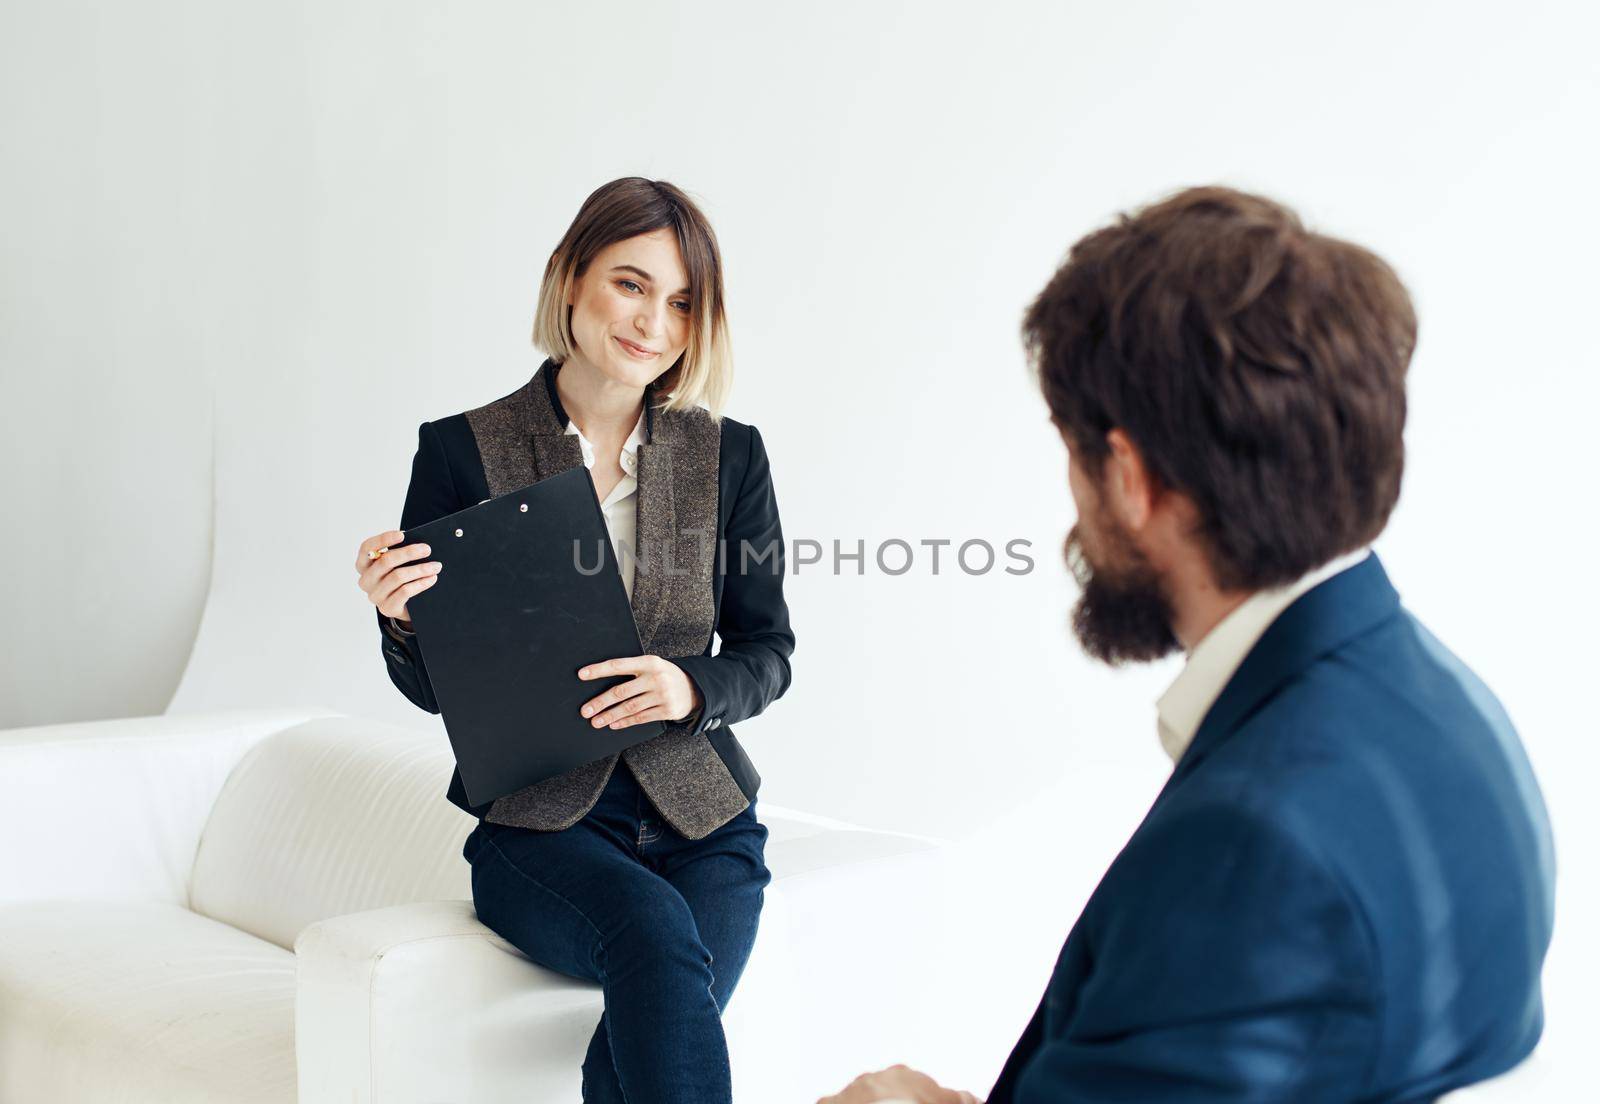 A man in a blue jacket sits opposite a woman in a suit on a light background indoors by SHOTPRIME